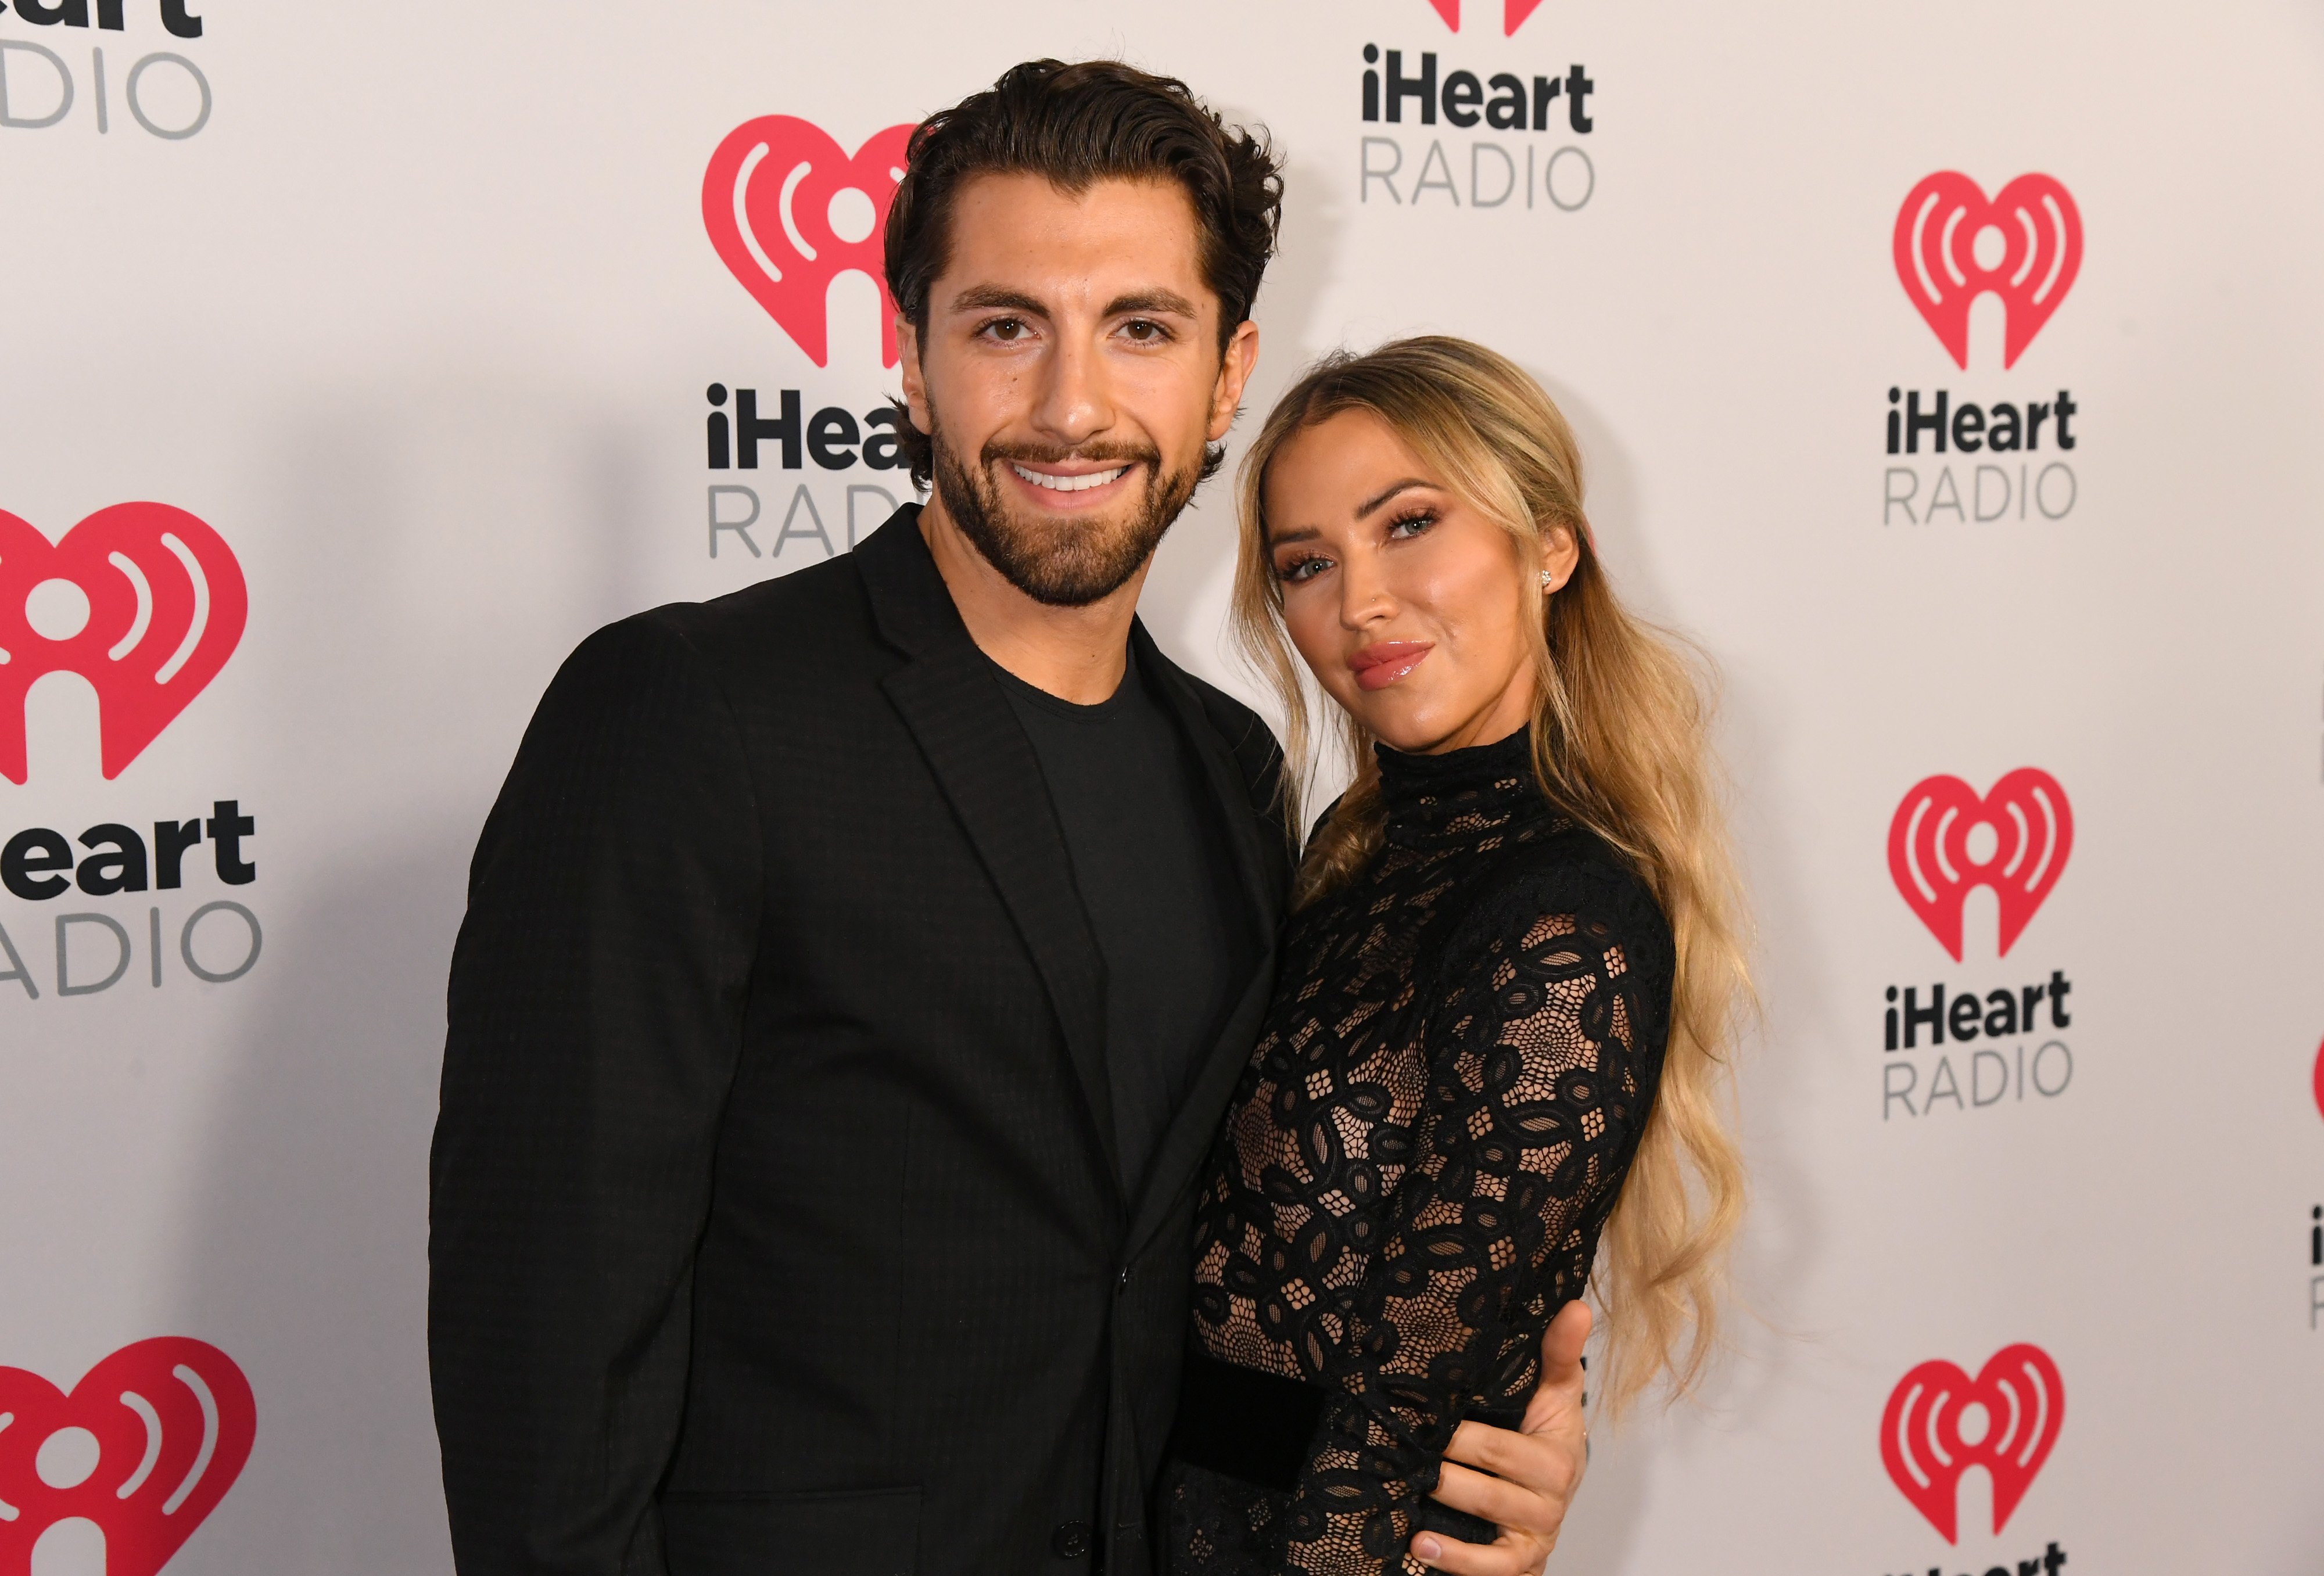 'The Bachelorette' stars Jason Tartick and Kaitlyn Bristowe pose for a photo together. Tartick wears a black suit over a black shirt. Bristowe wears a black, long-sleeved, lacy dress.